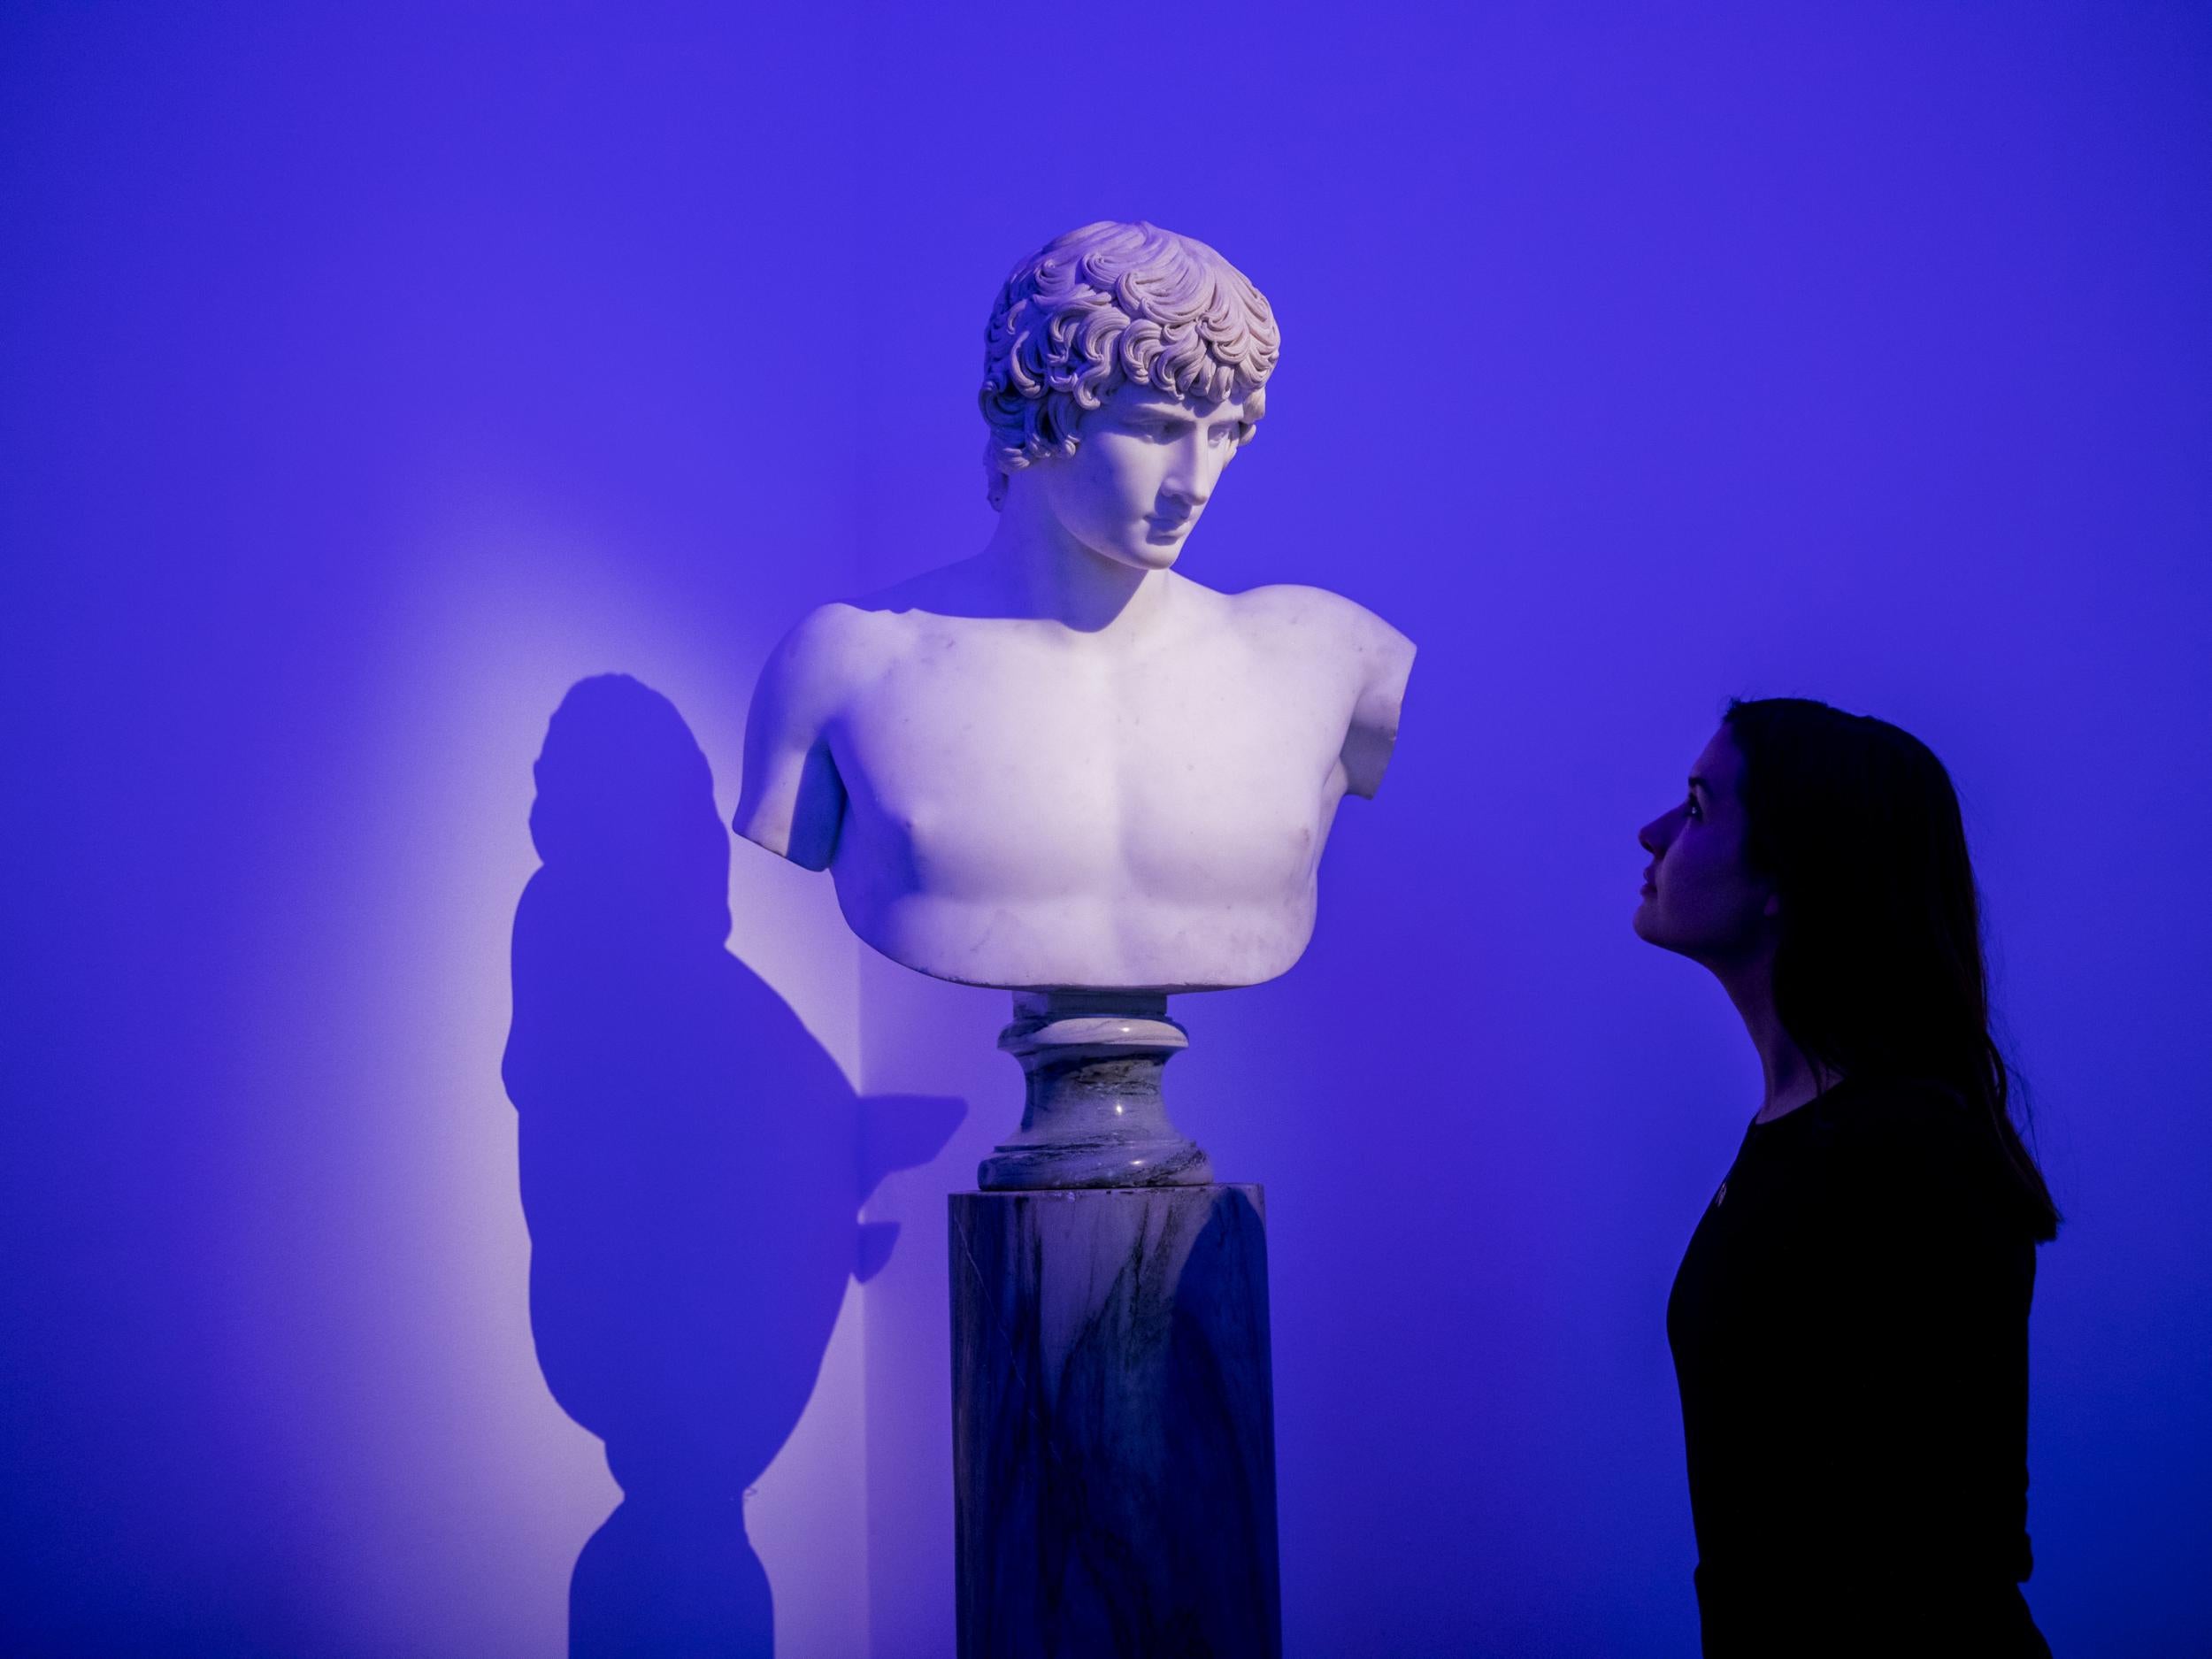 ‘The most famous homosexual couple in Roman history’: An 18th-century bust of Antinous, the teenage favourite of Emperor Hadrian